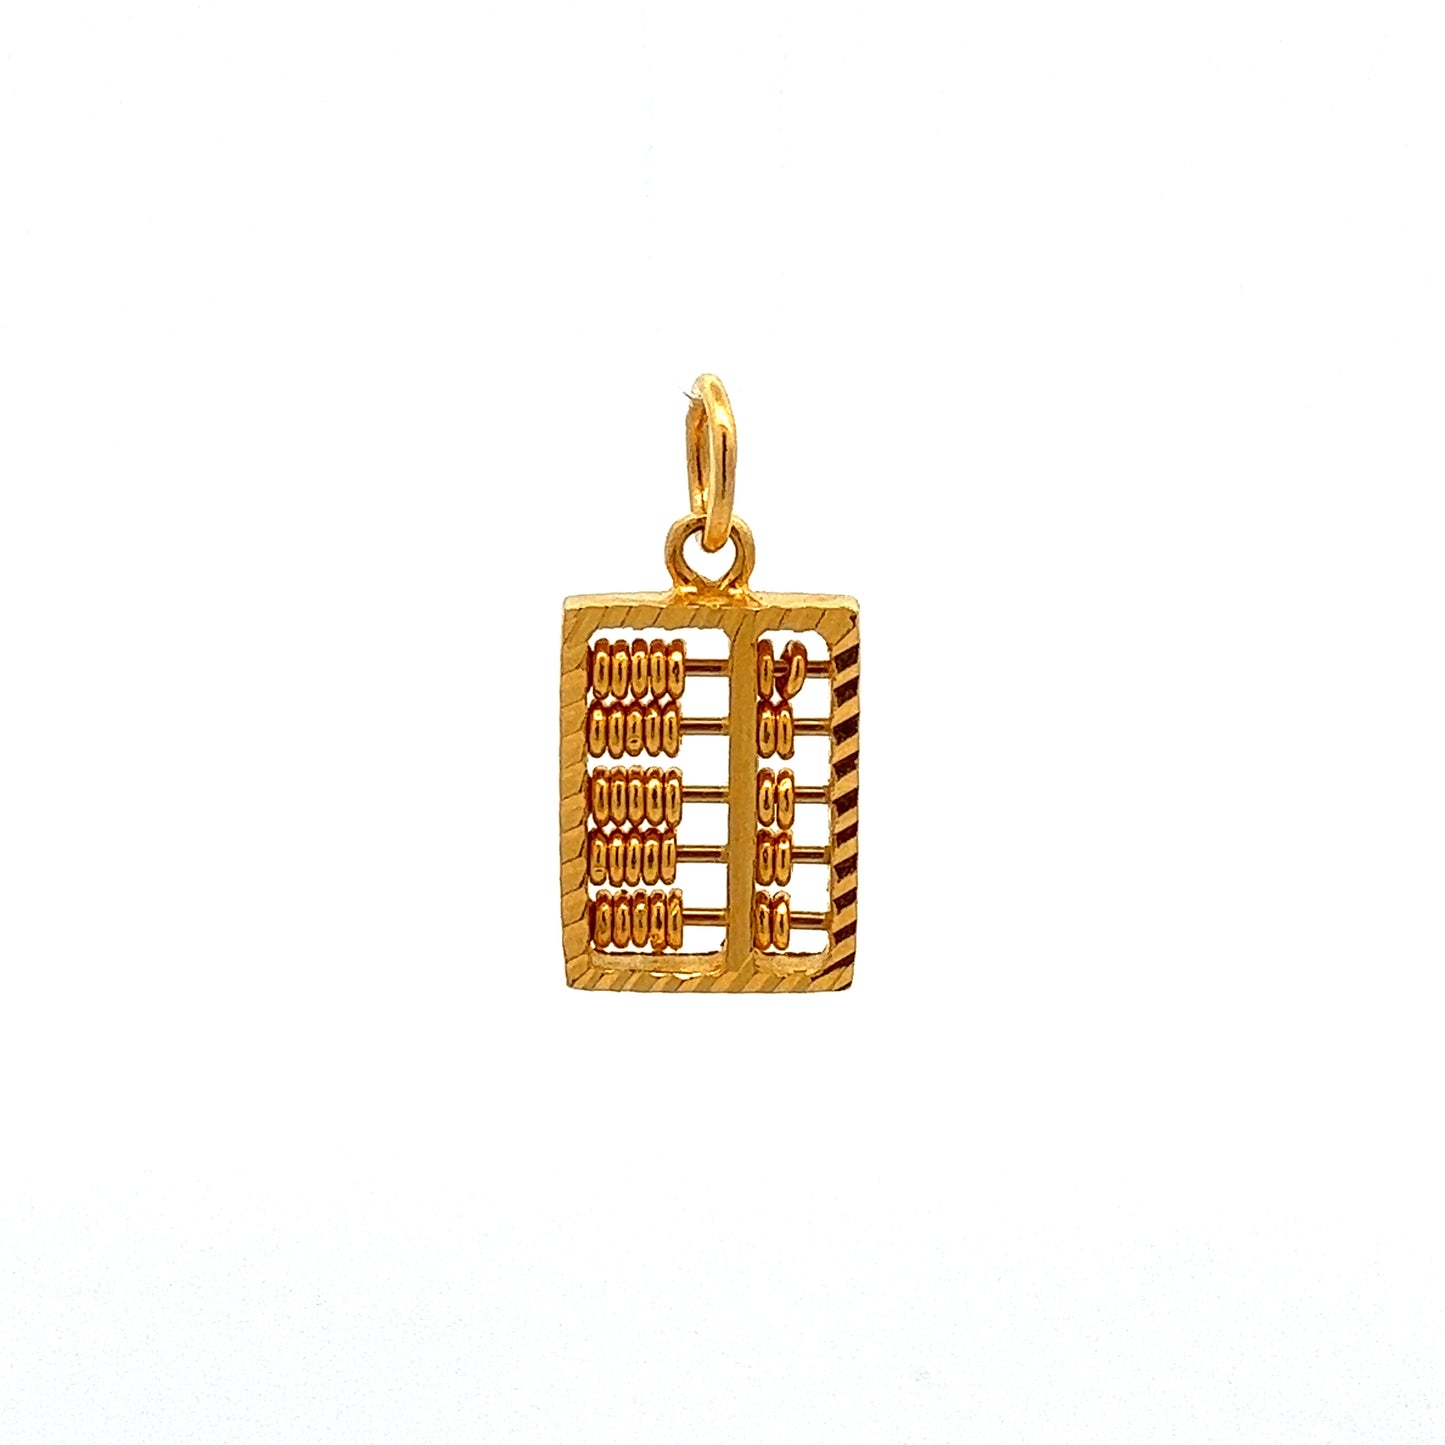 GOLD PENDANT ( 22K ) ( 3.41g ) - 0010657 Chain sold separately